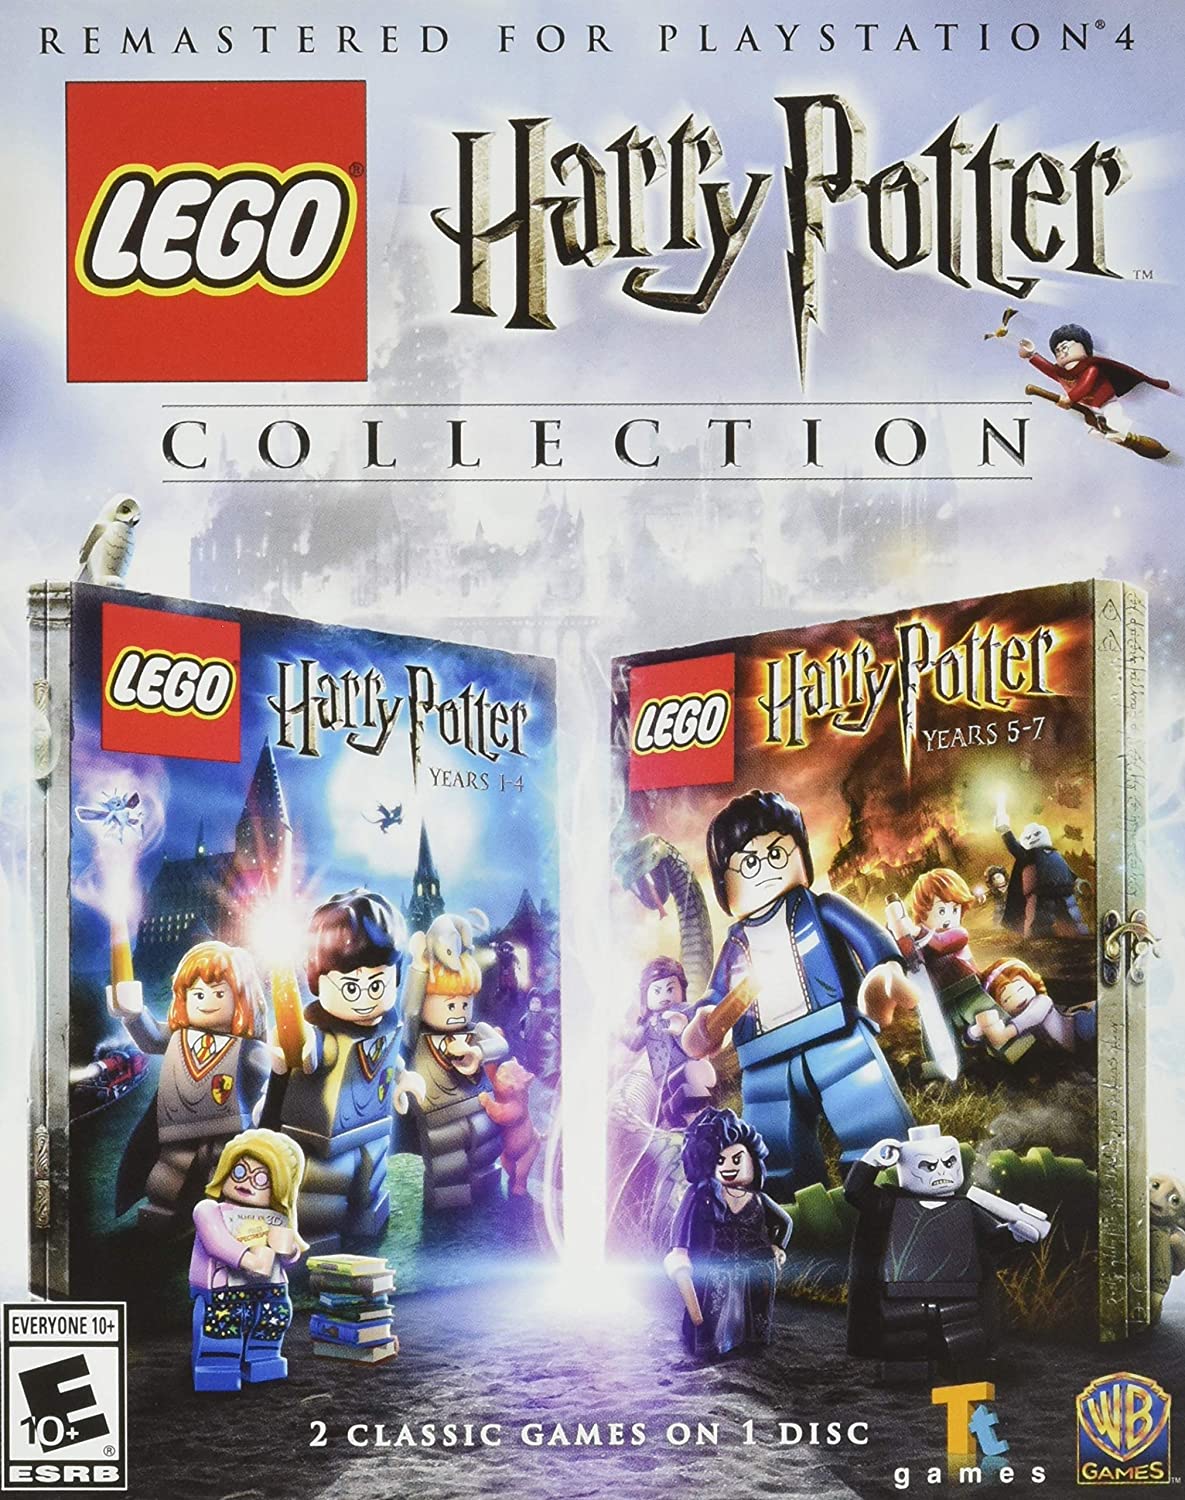 Lego Harry Potter Collection Adventure New Video Games Is for Everyone 10+ PlayStation 4 - image 4 of 8